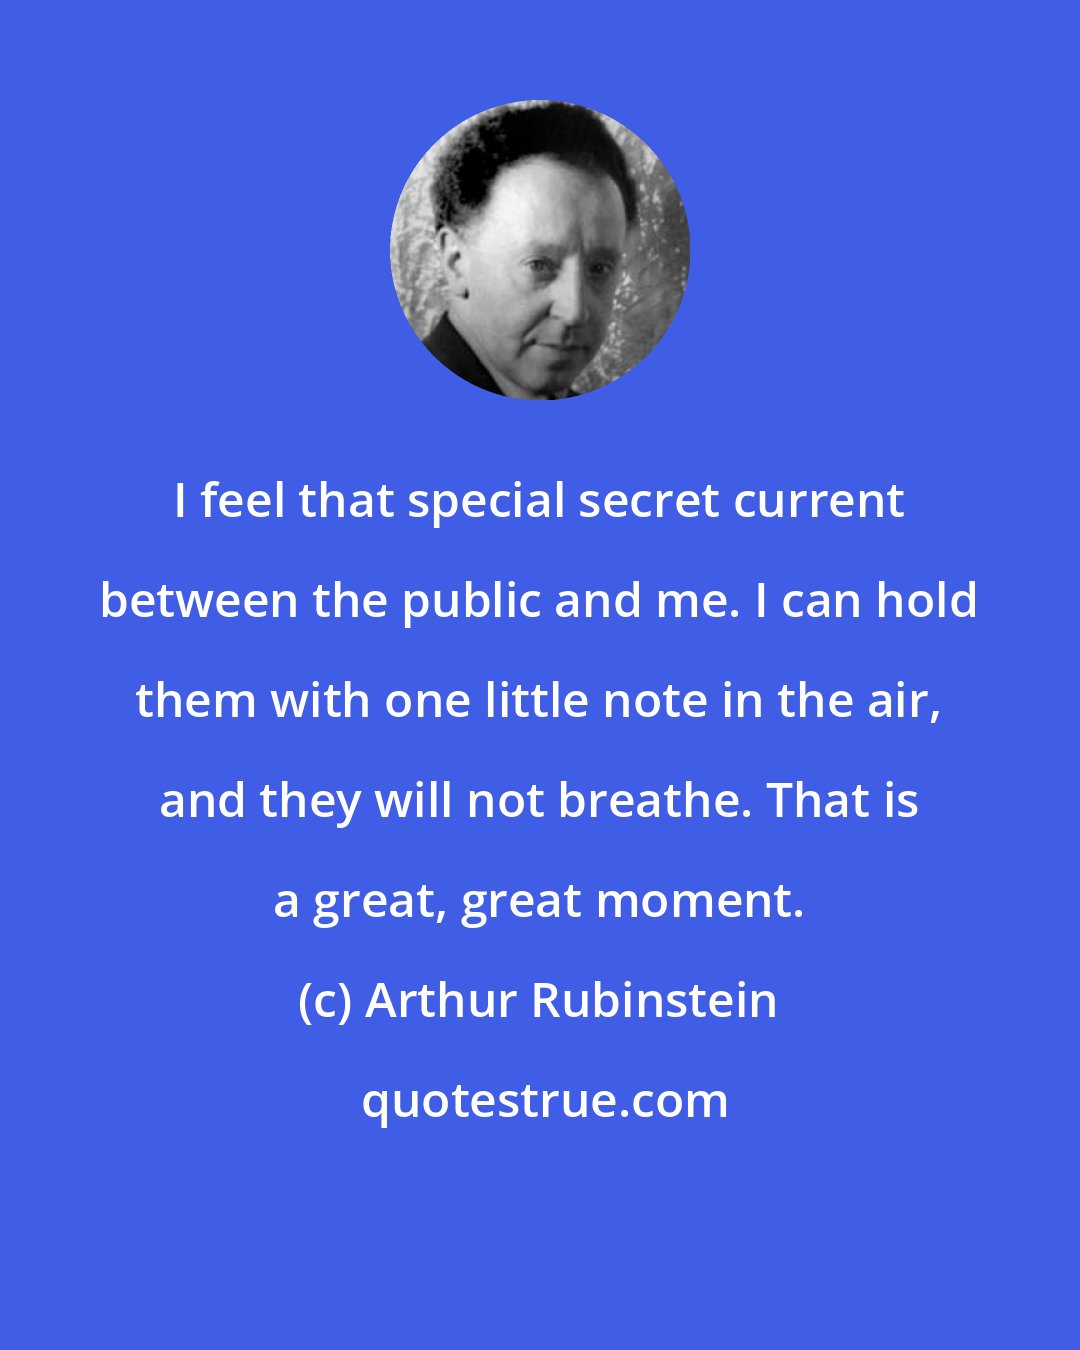 Arthur Rubinstein: I feel that special secret current between the public and me. I can hold them with one little note in the air, and they will not breathe. That is a great, great moment.